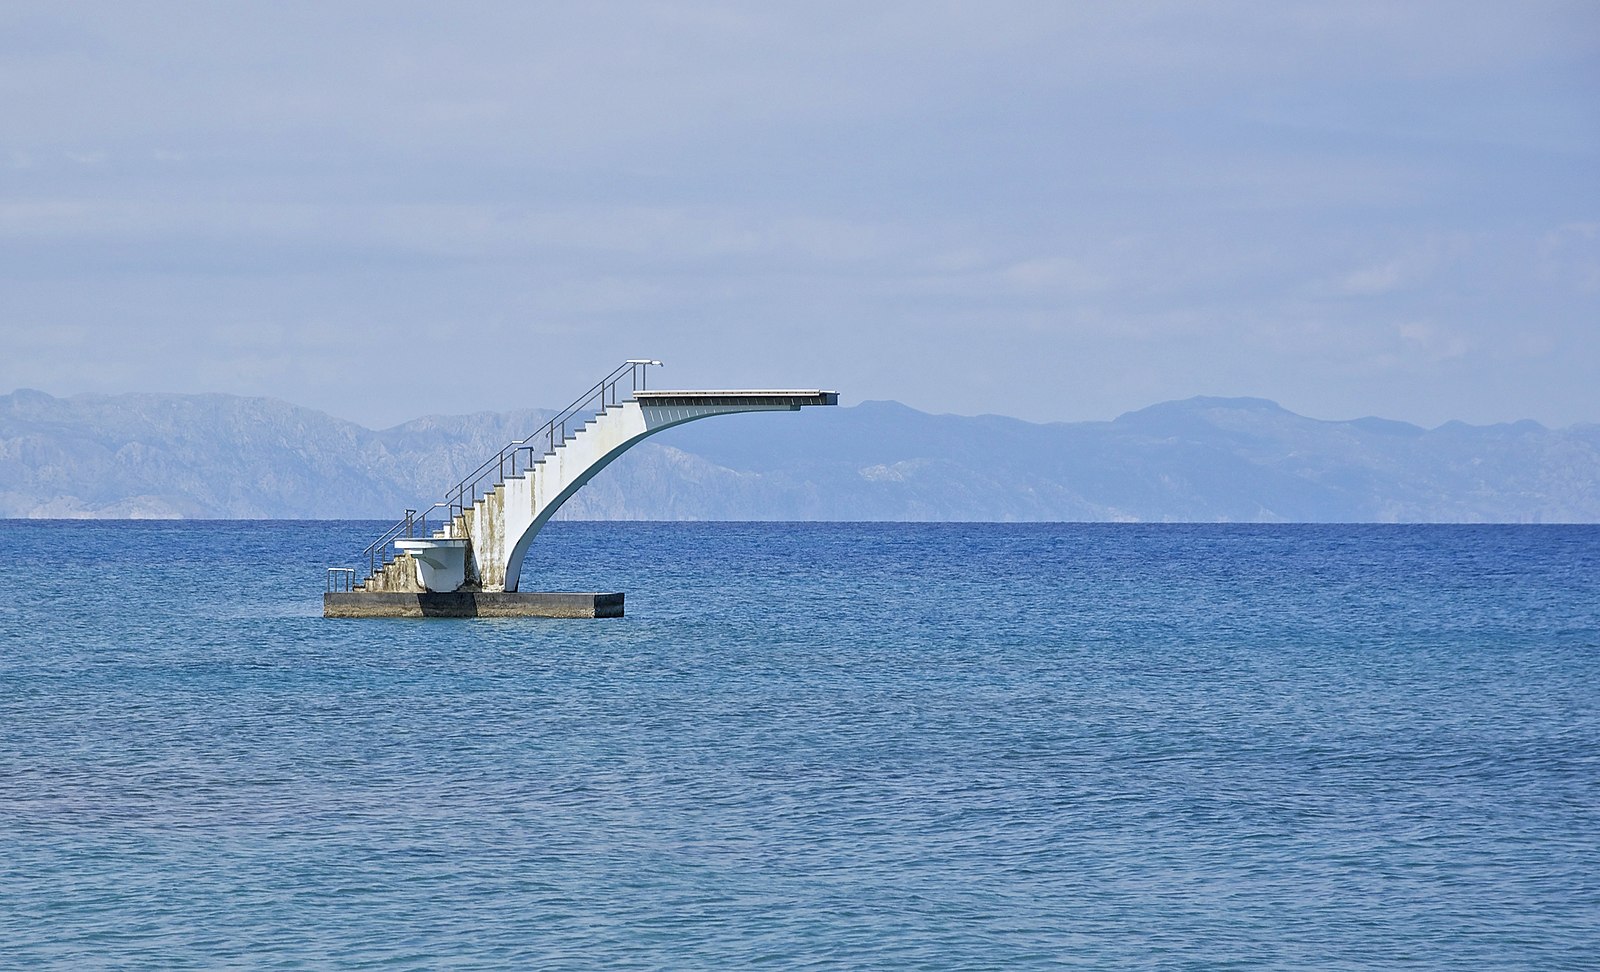 Diving board on Rhodes also known as trampoline of Rhodes